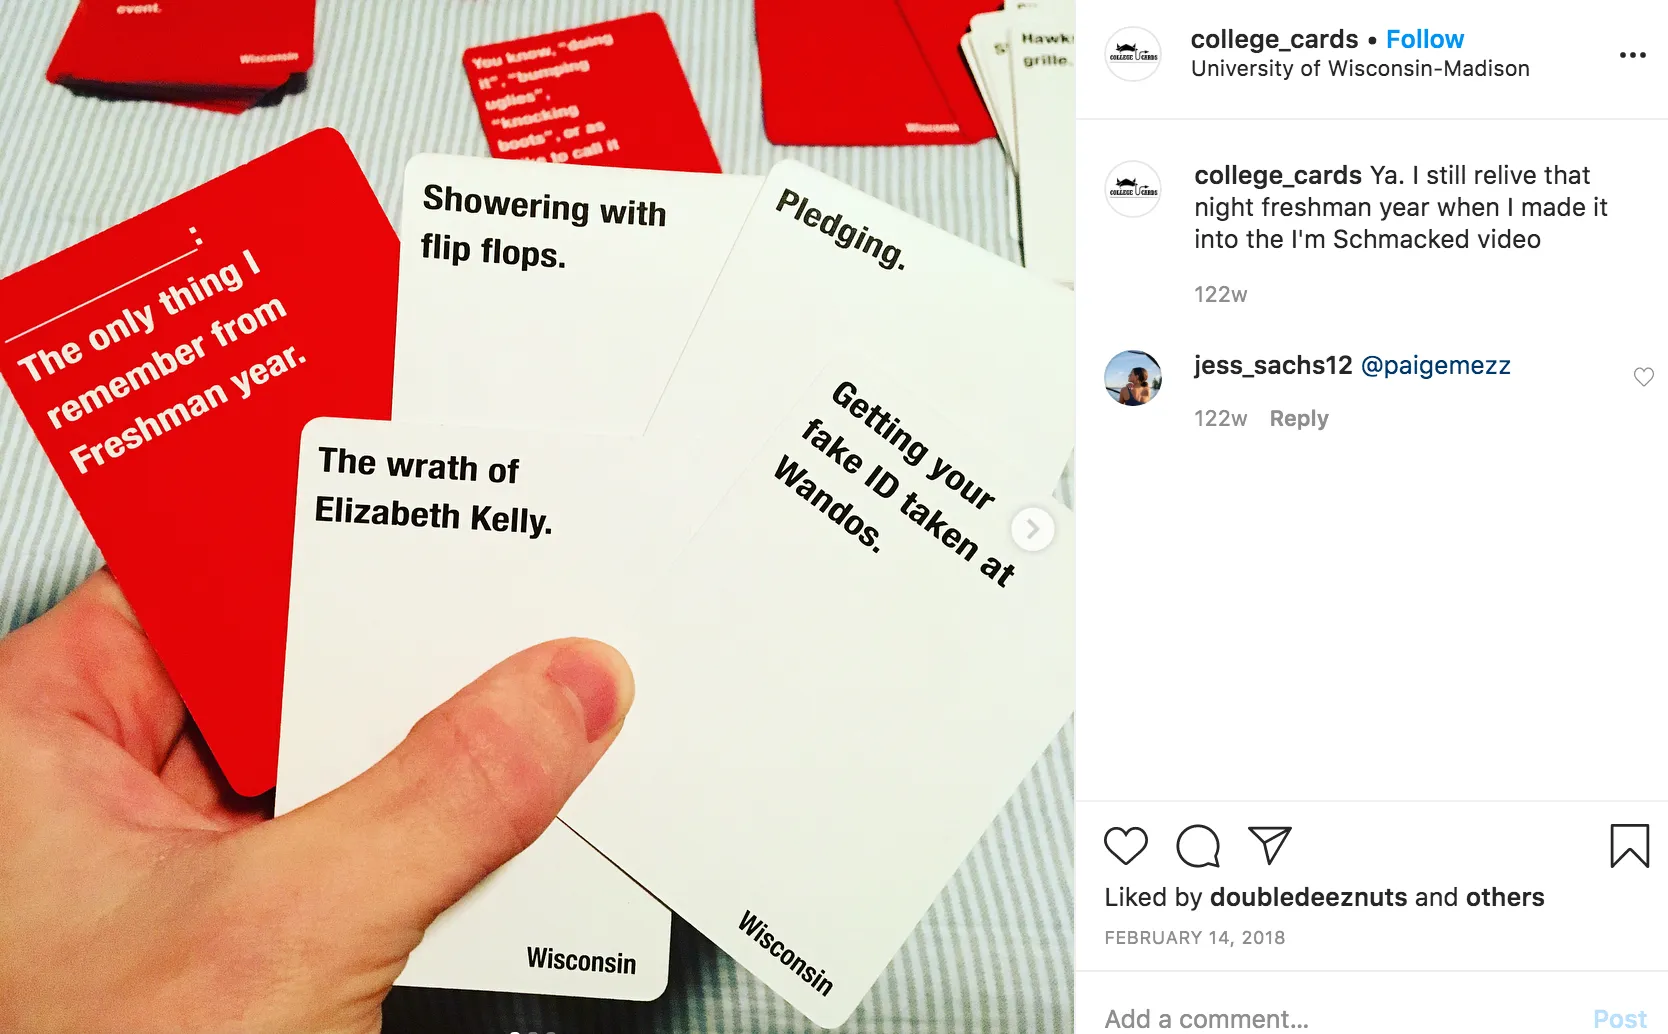 featured image - How I Localized Cards Against Humanity, Gamed Instagram, Made $13,000, & Got Shut Down by University